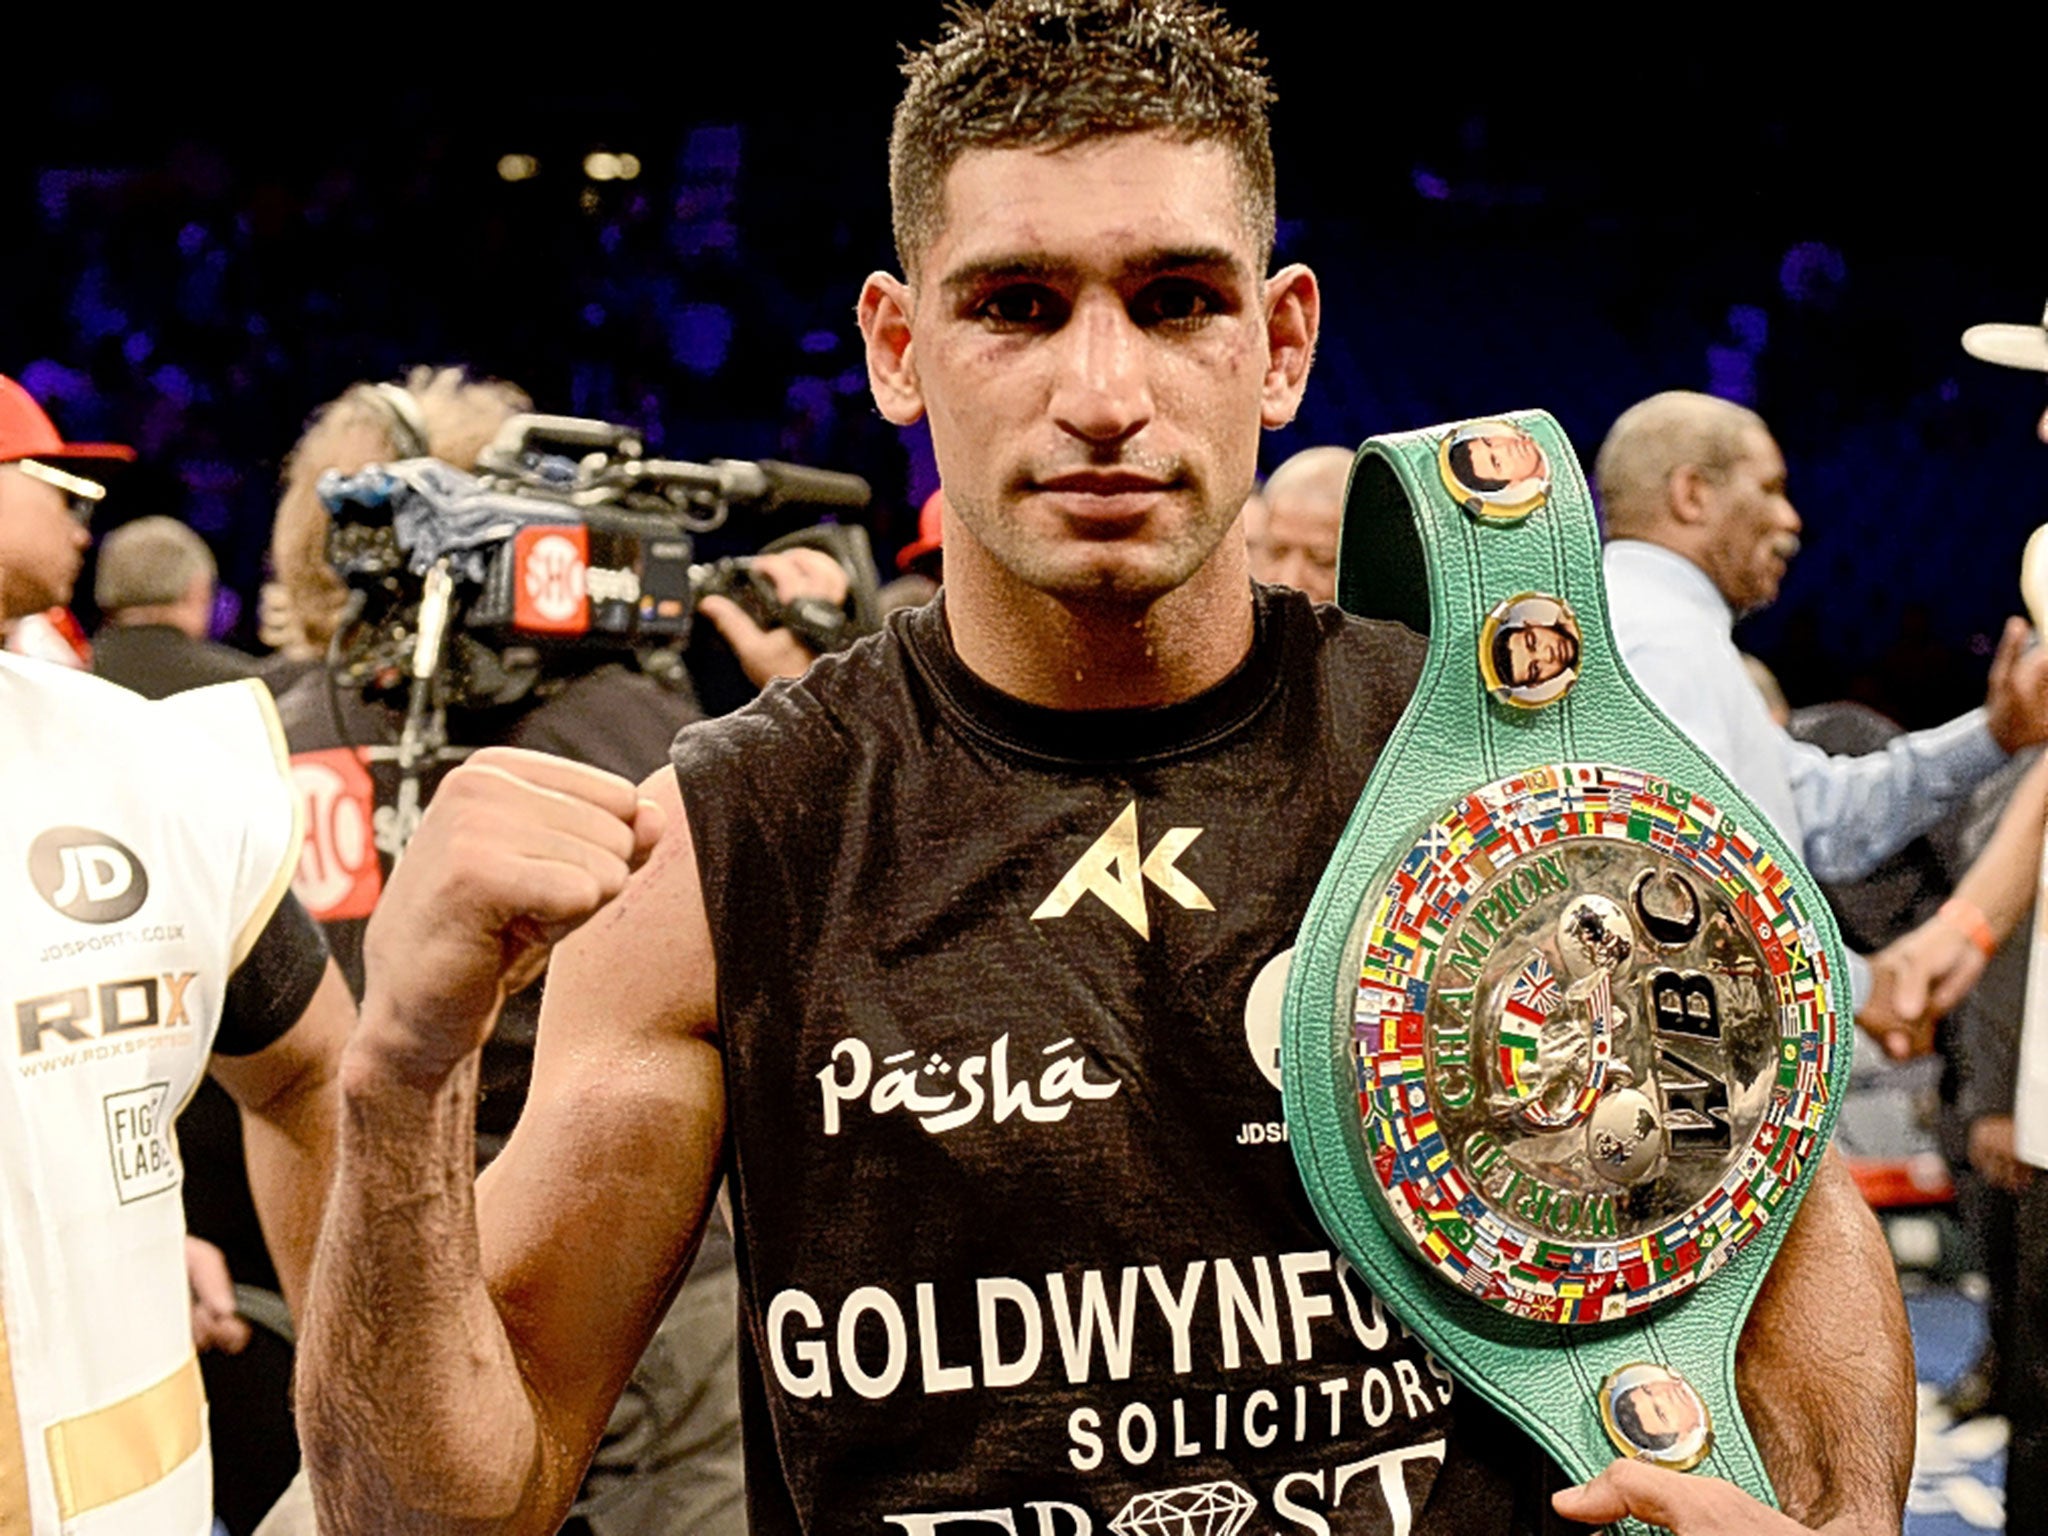 Amir Khan is engaged in a broader battle than attempting to win a fight with Floyd Mayweather